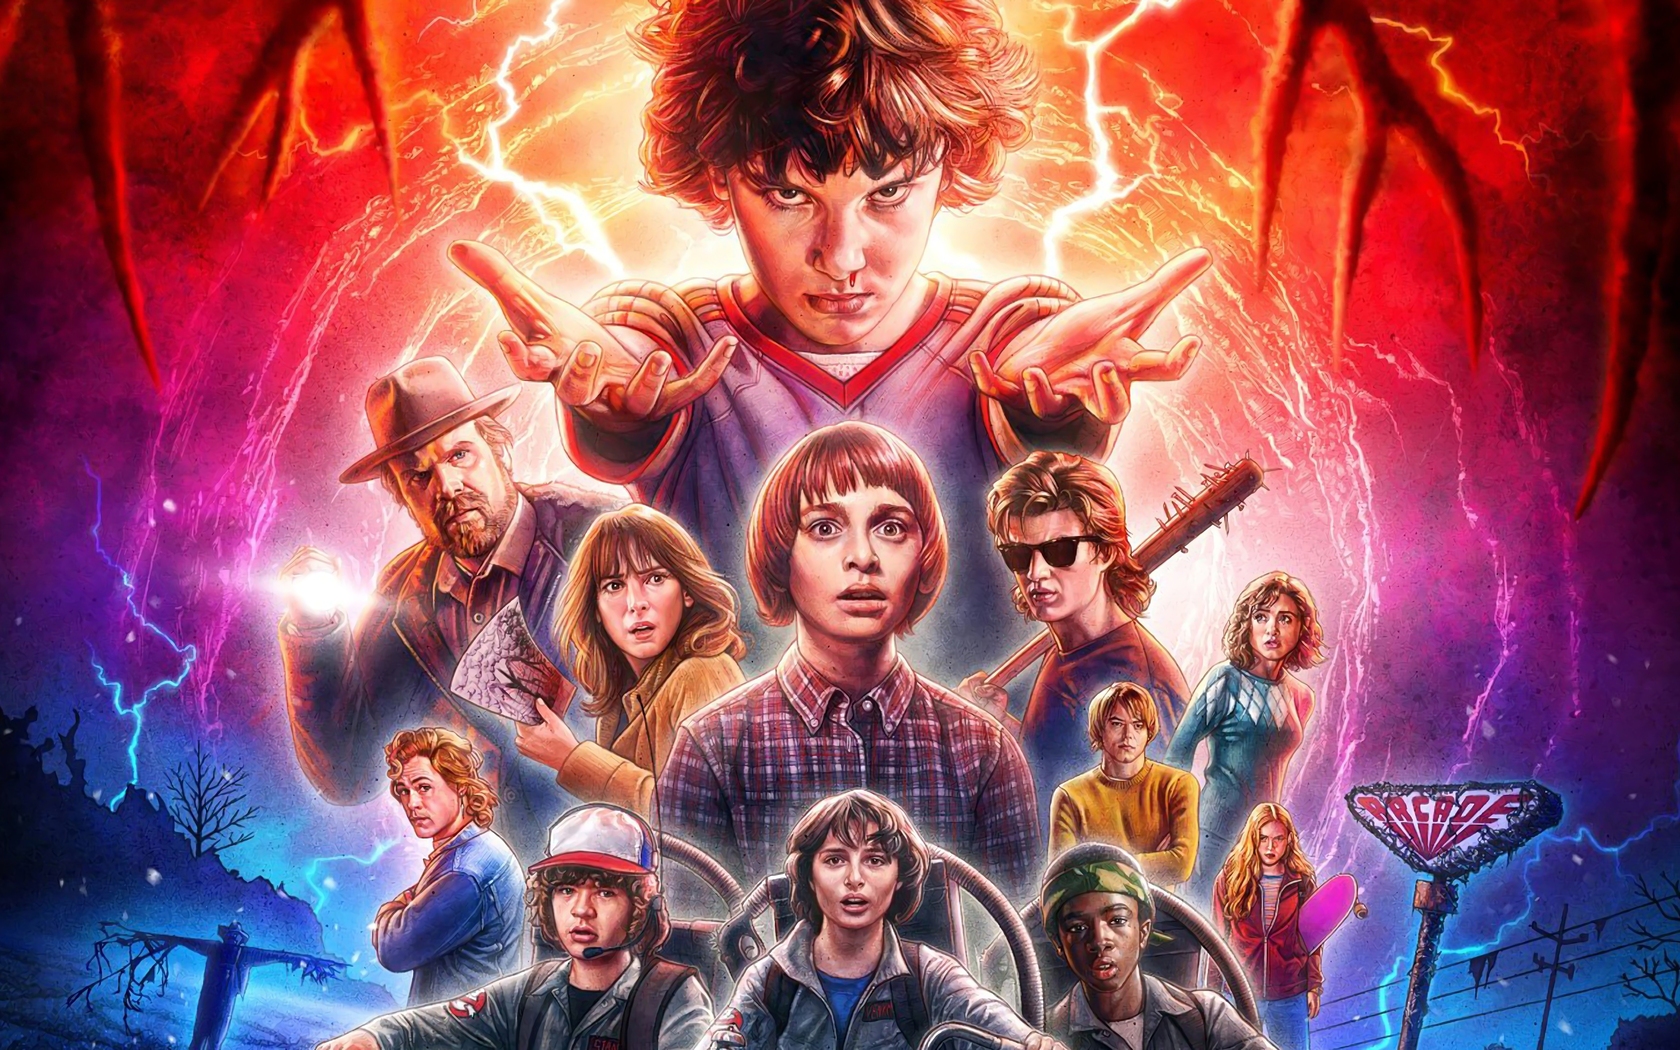 4k-wallpapers. stranger-things-wallpapers. tv-shows-wallpapers. hd-wallpape...